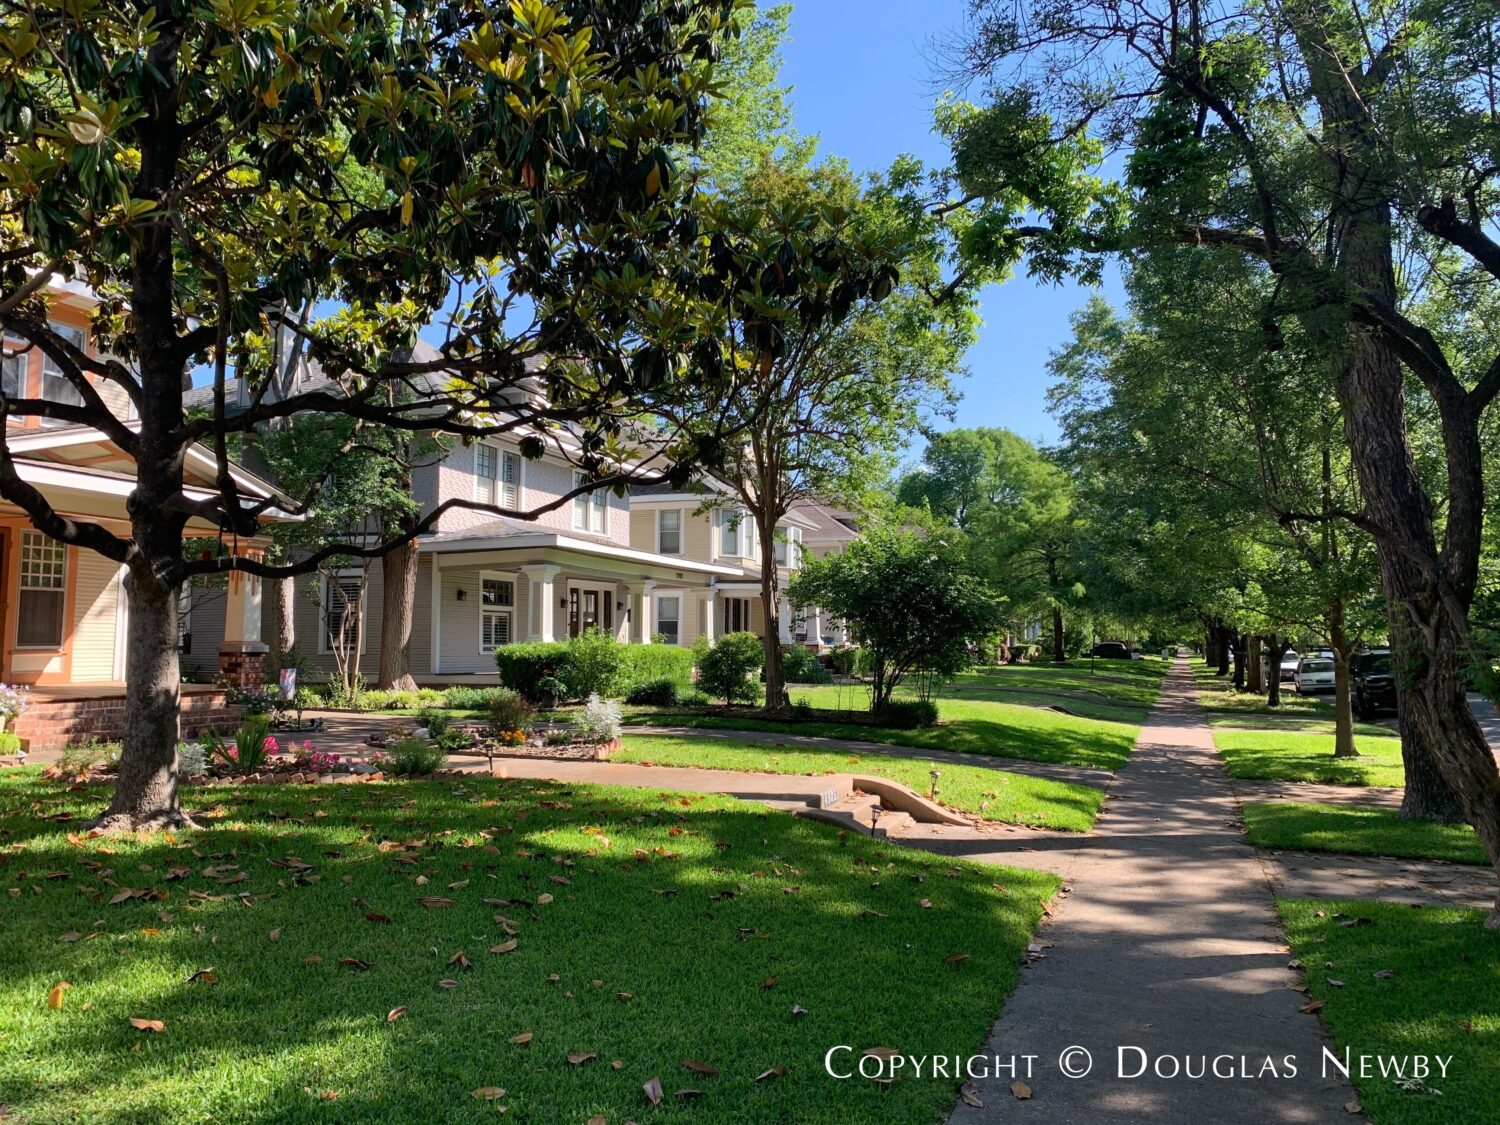 A homeowner’s greatest property right is single-family zoning, which this home is protected by. A short-term rental next door would disrupt the tranquility of the neighborhood.